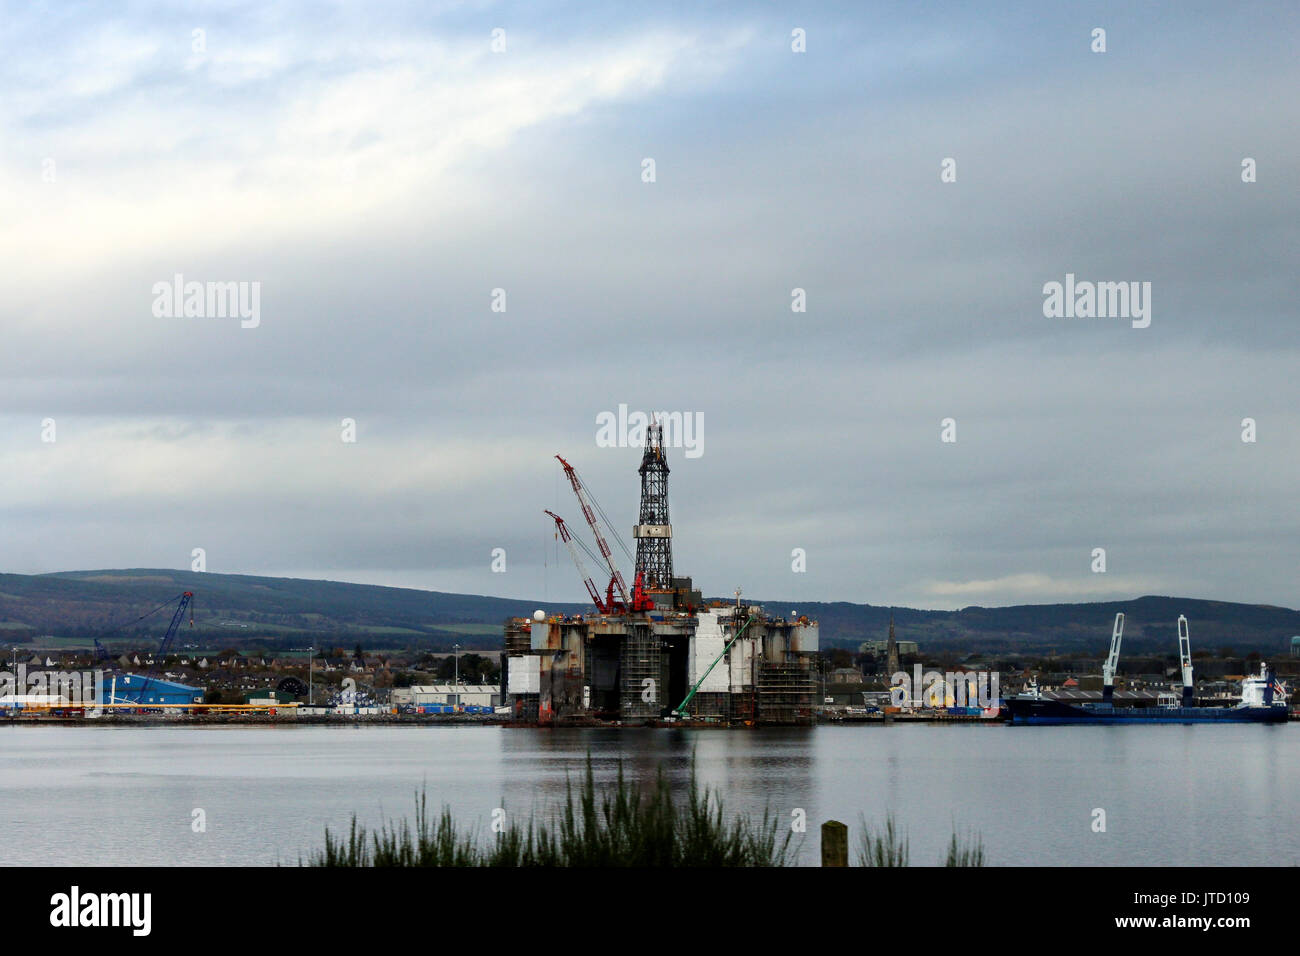 Scotland, Highlands, Scottish Scenery, Oil Platform, Oil Rig, Drill Rig, Industry at Sea, Water Reflections, Green Mountain Background Stock Photo